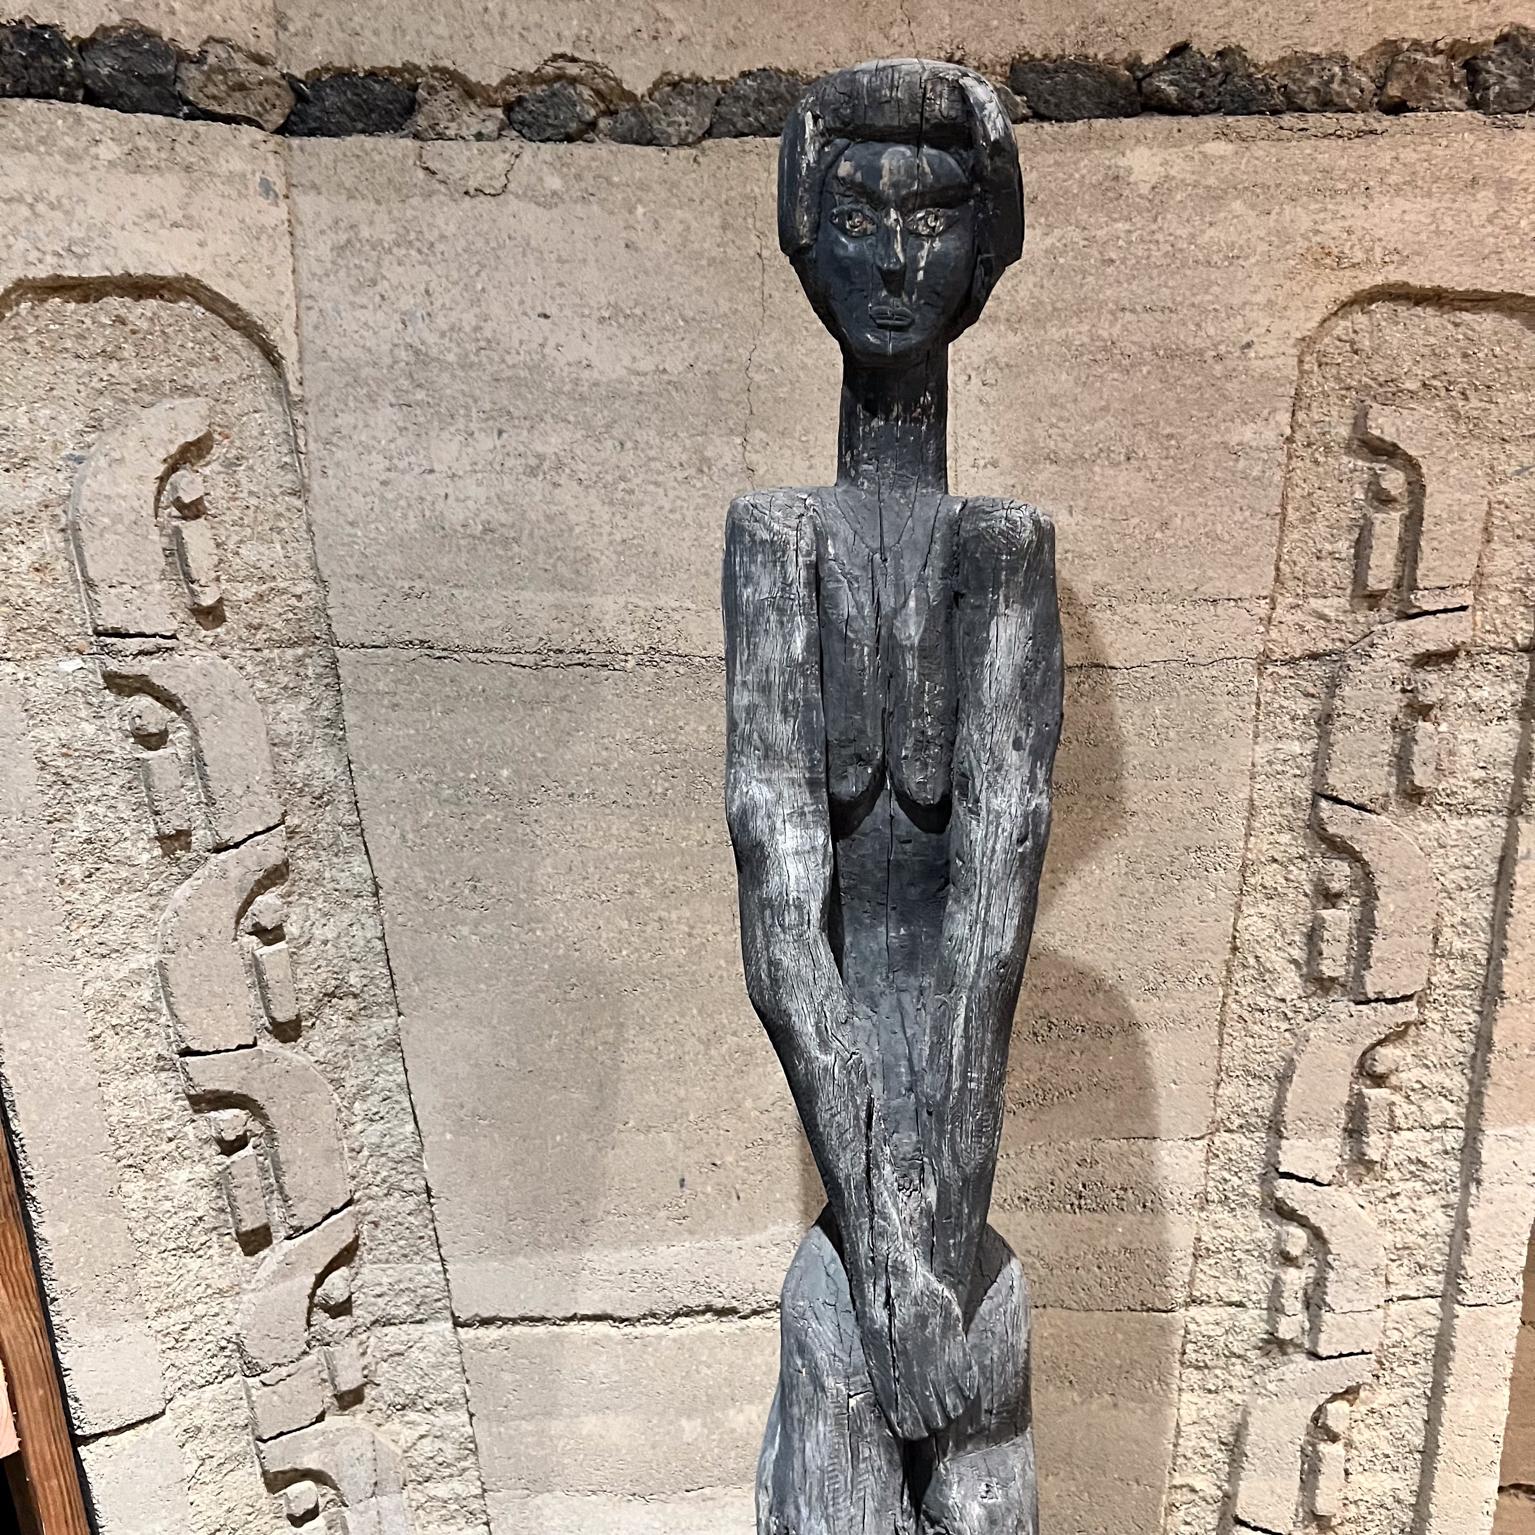 Primitive French Hand Carved Standing Femme Female Wood Sculpture
Wood hand crafted design mounted on Raw Stone Base
In the style of Giacometti ideal for Jenerette Picasso & Prouvé fans.
71 h with Stone Base, Wood 65 h x 11 d x 9 w Stone 6 h x 16 d